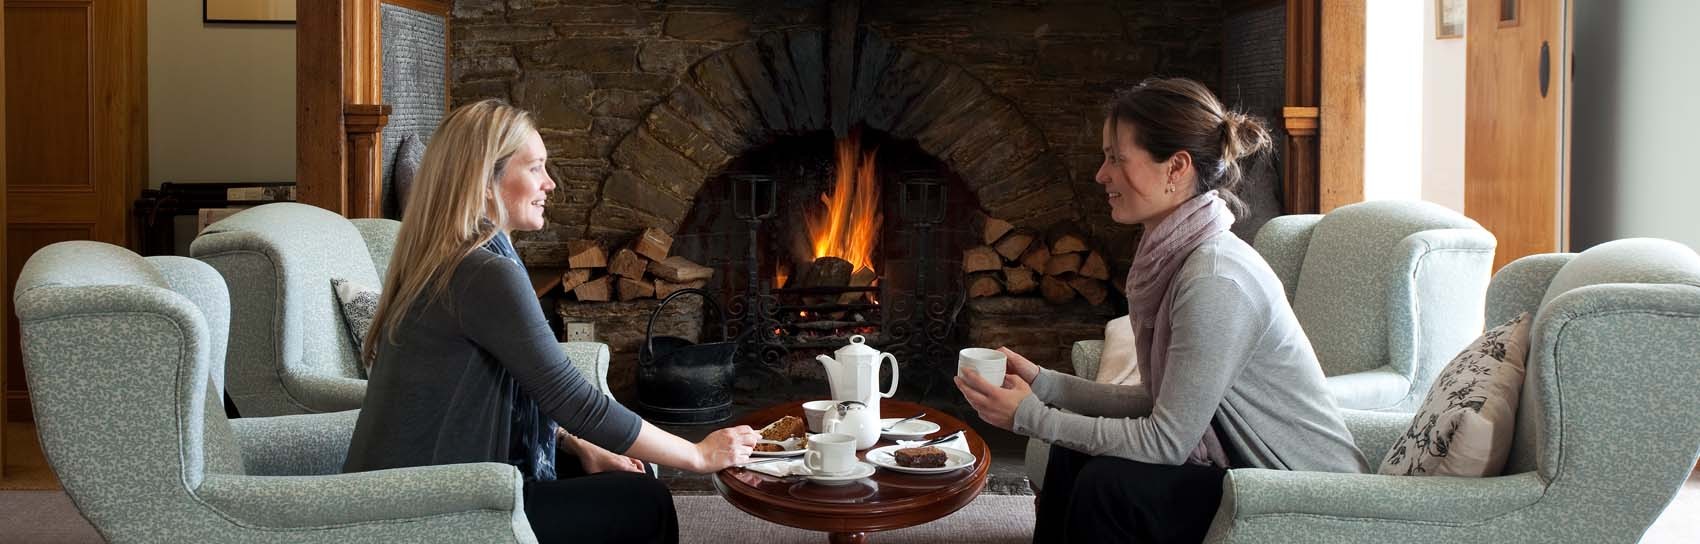 Fireside coffee at the Budock Vean Hotel. Photograph by BUDOCK VEAN HOTEL & HOLIDAY HOMES